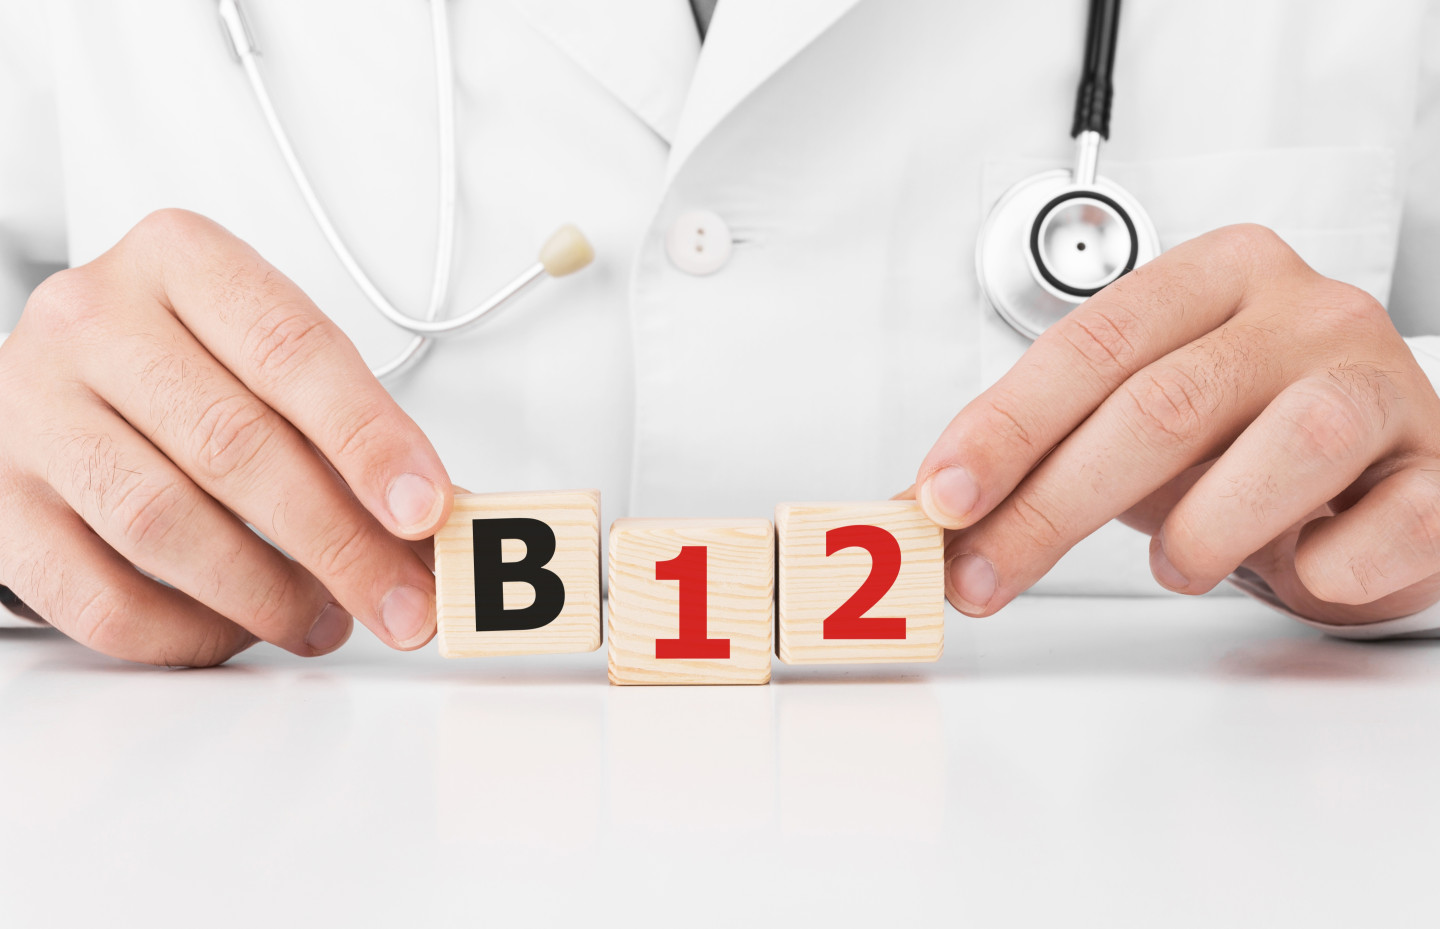 Vitamin B12: what is it for, what foods does it contain?